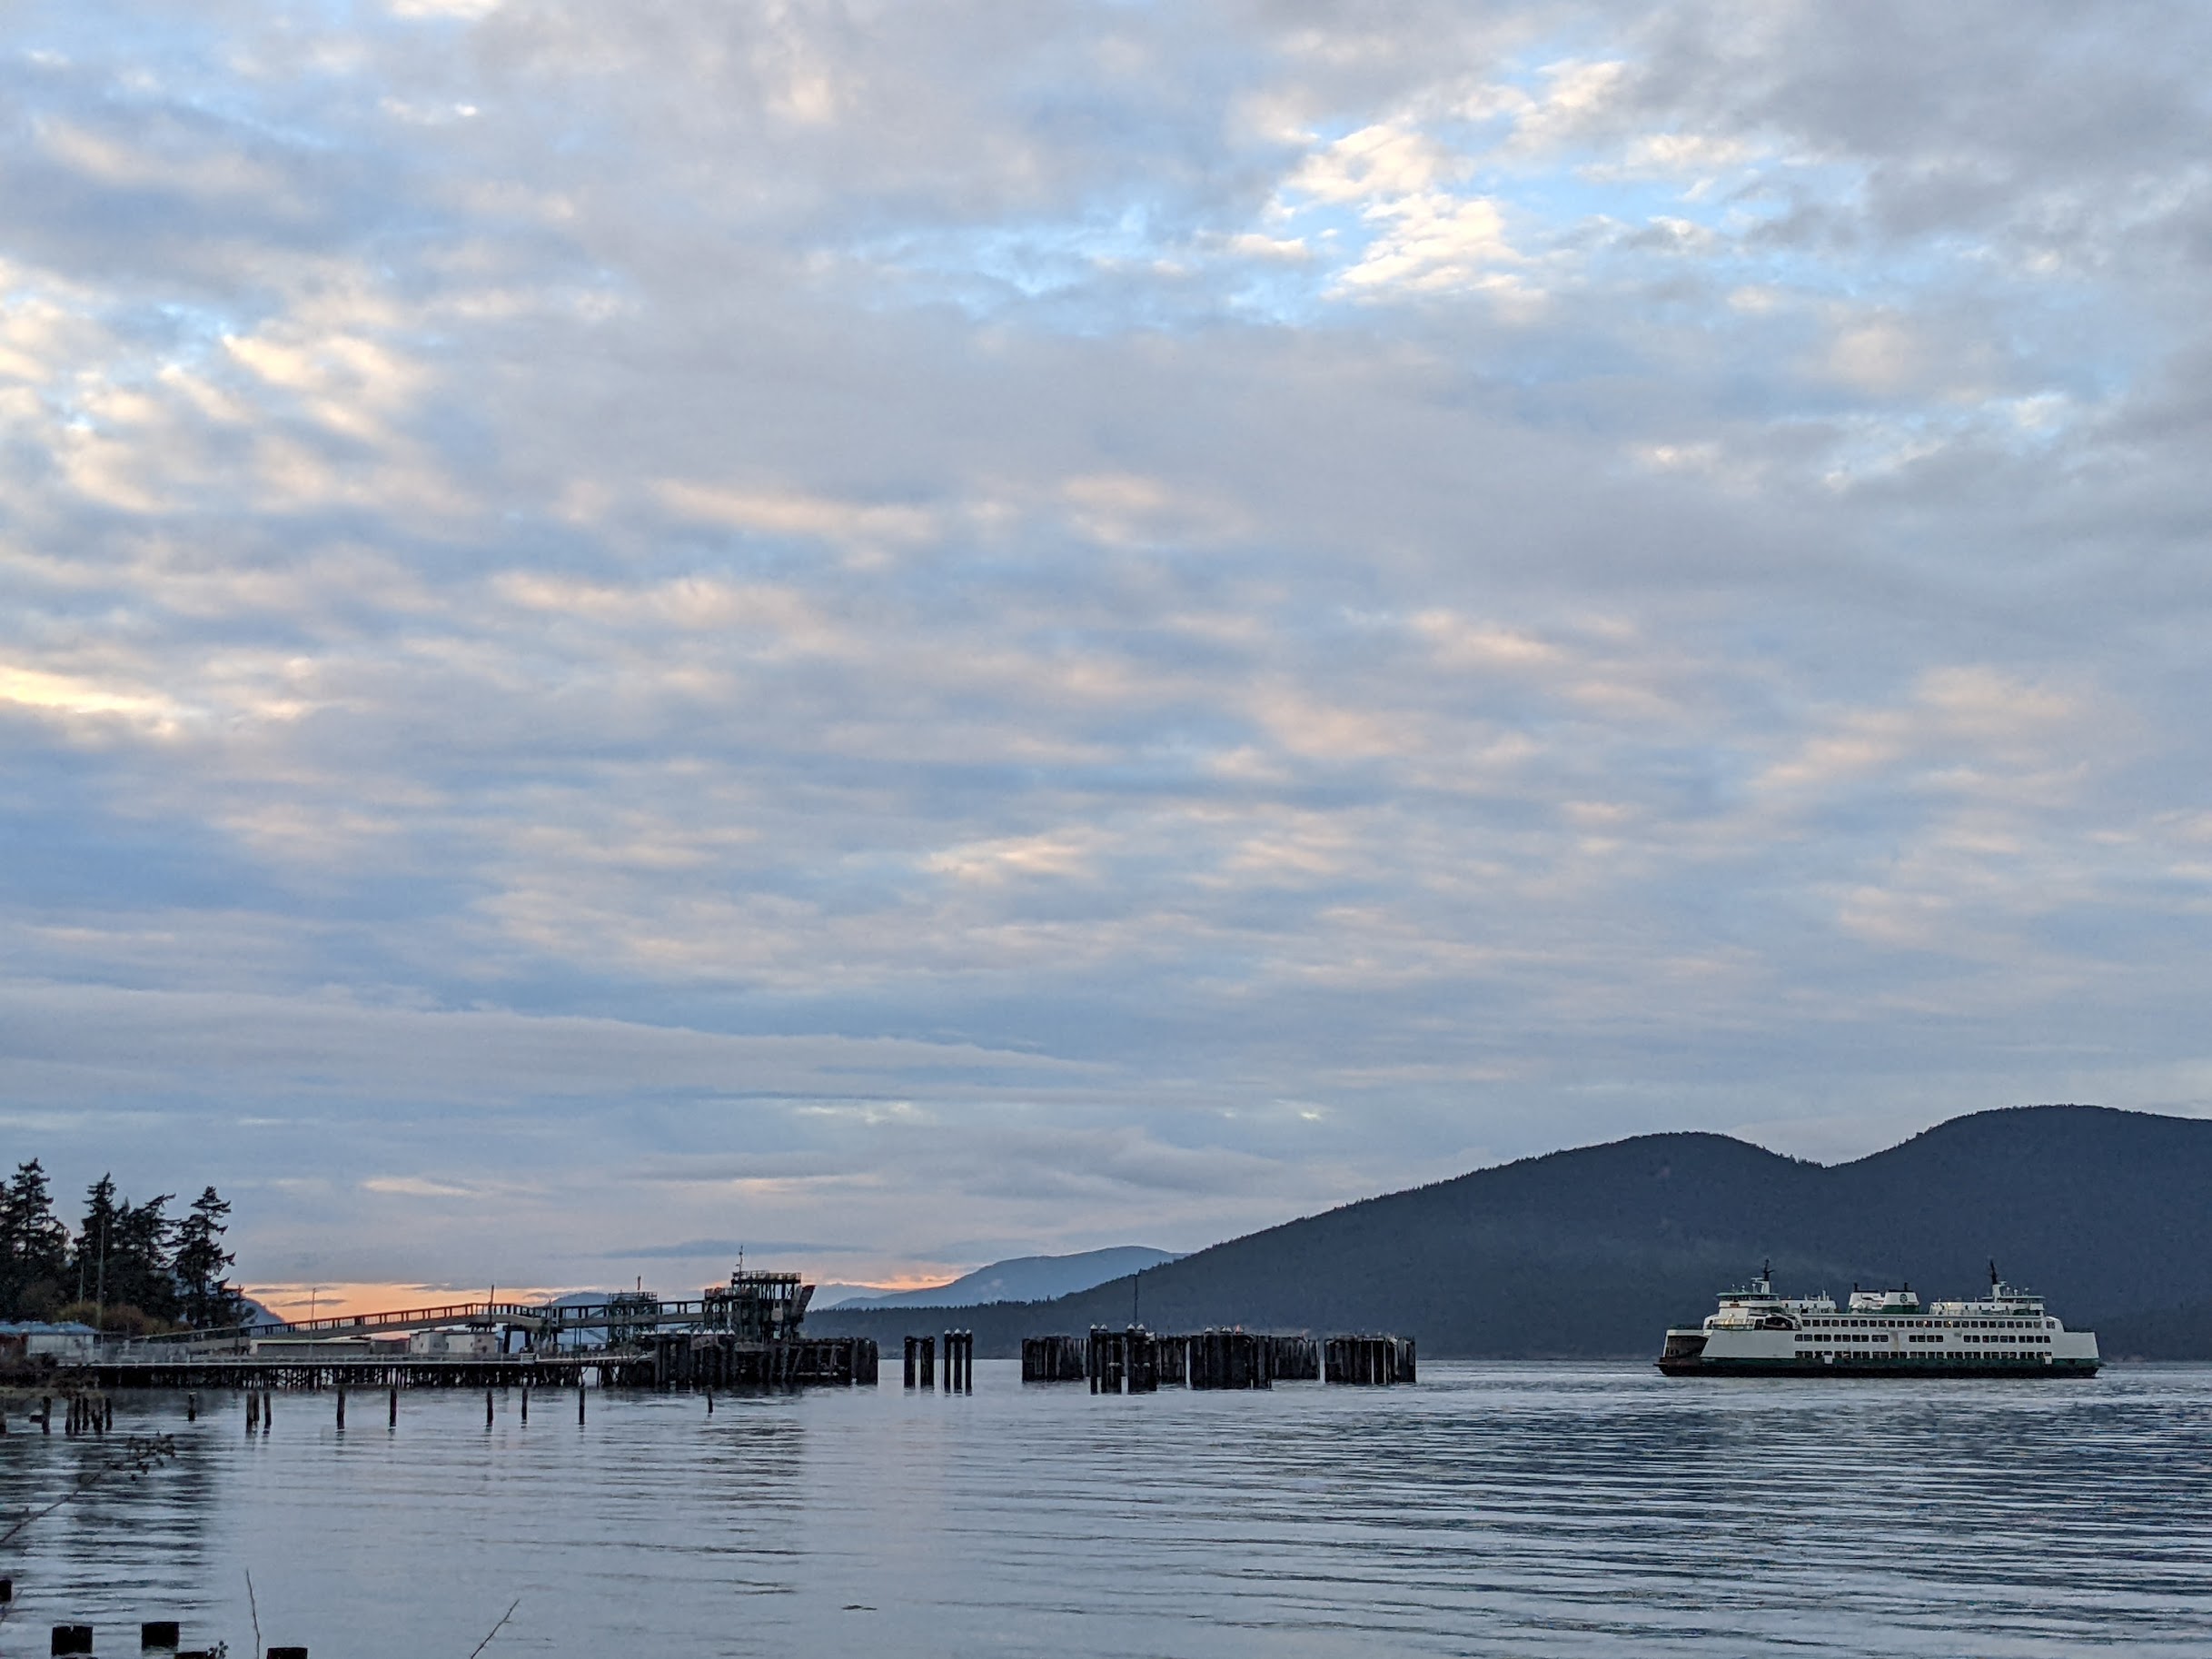 Washington State Ferry leaving Anacortes for Orcas Island